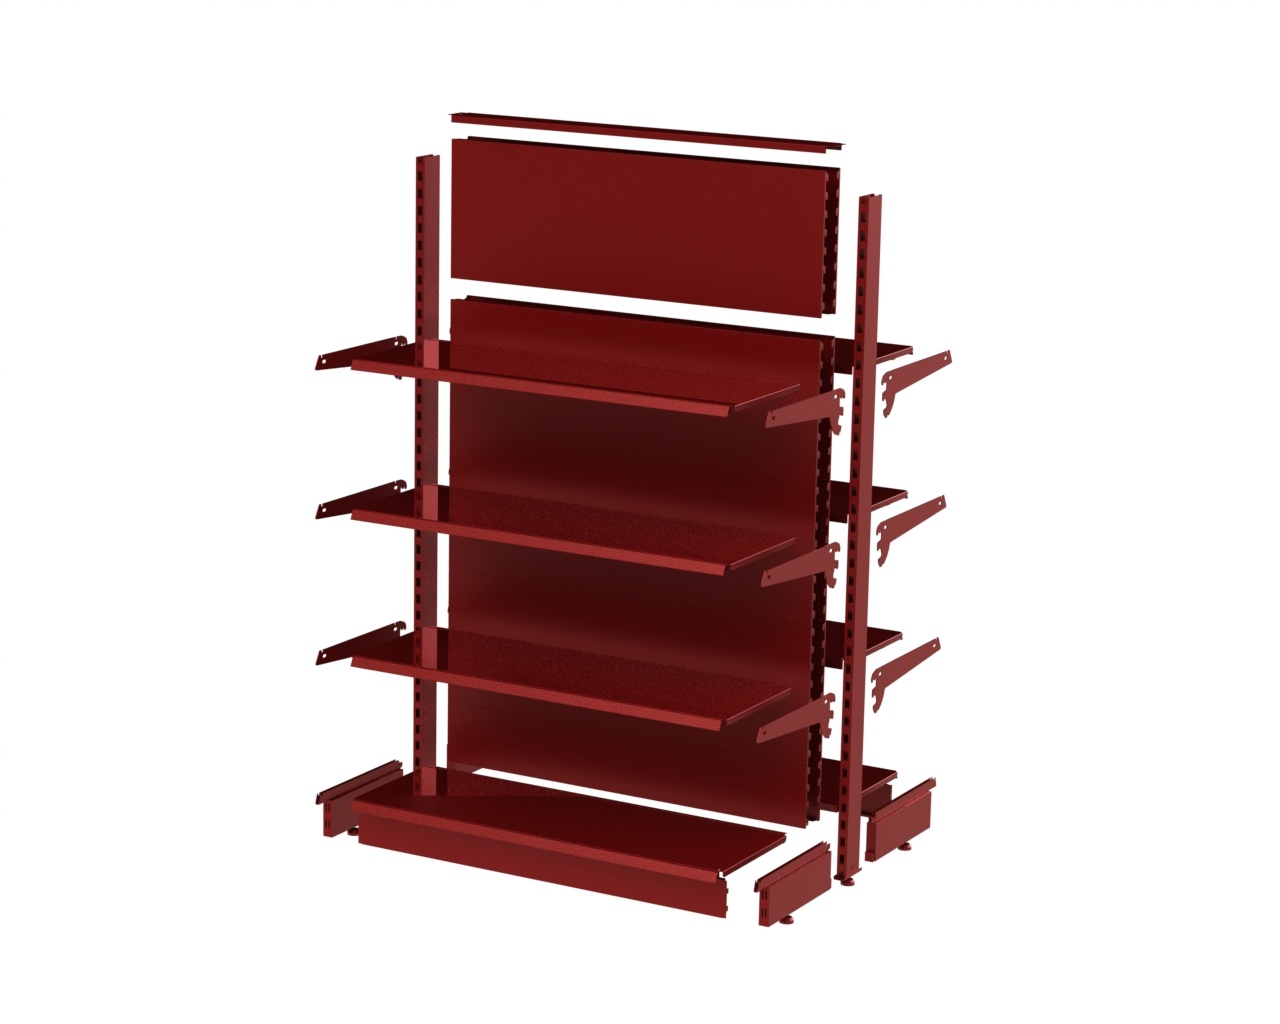 European Design Commercial Display Shelving for Store and Supermarket